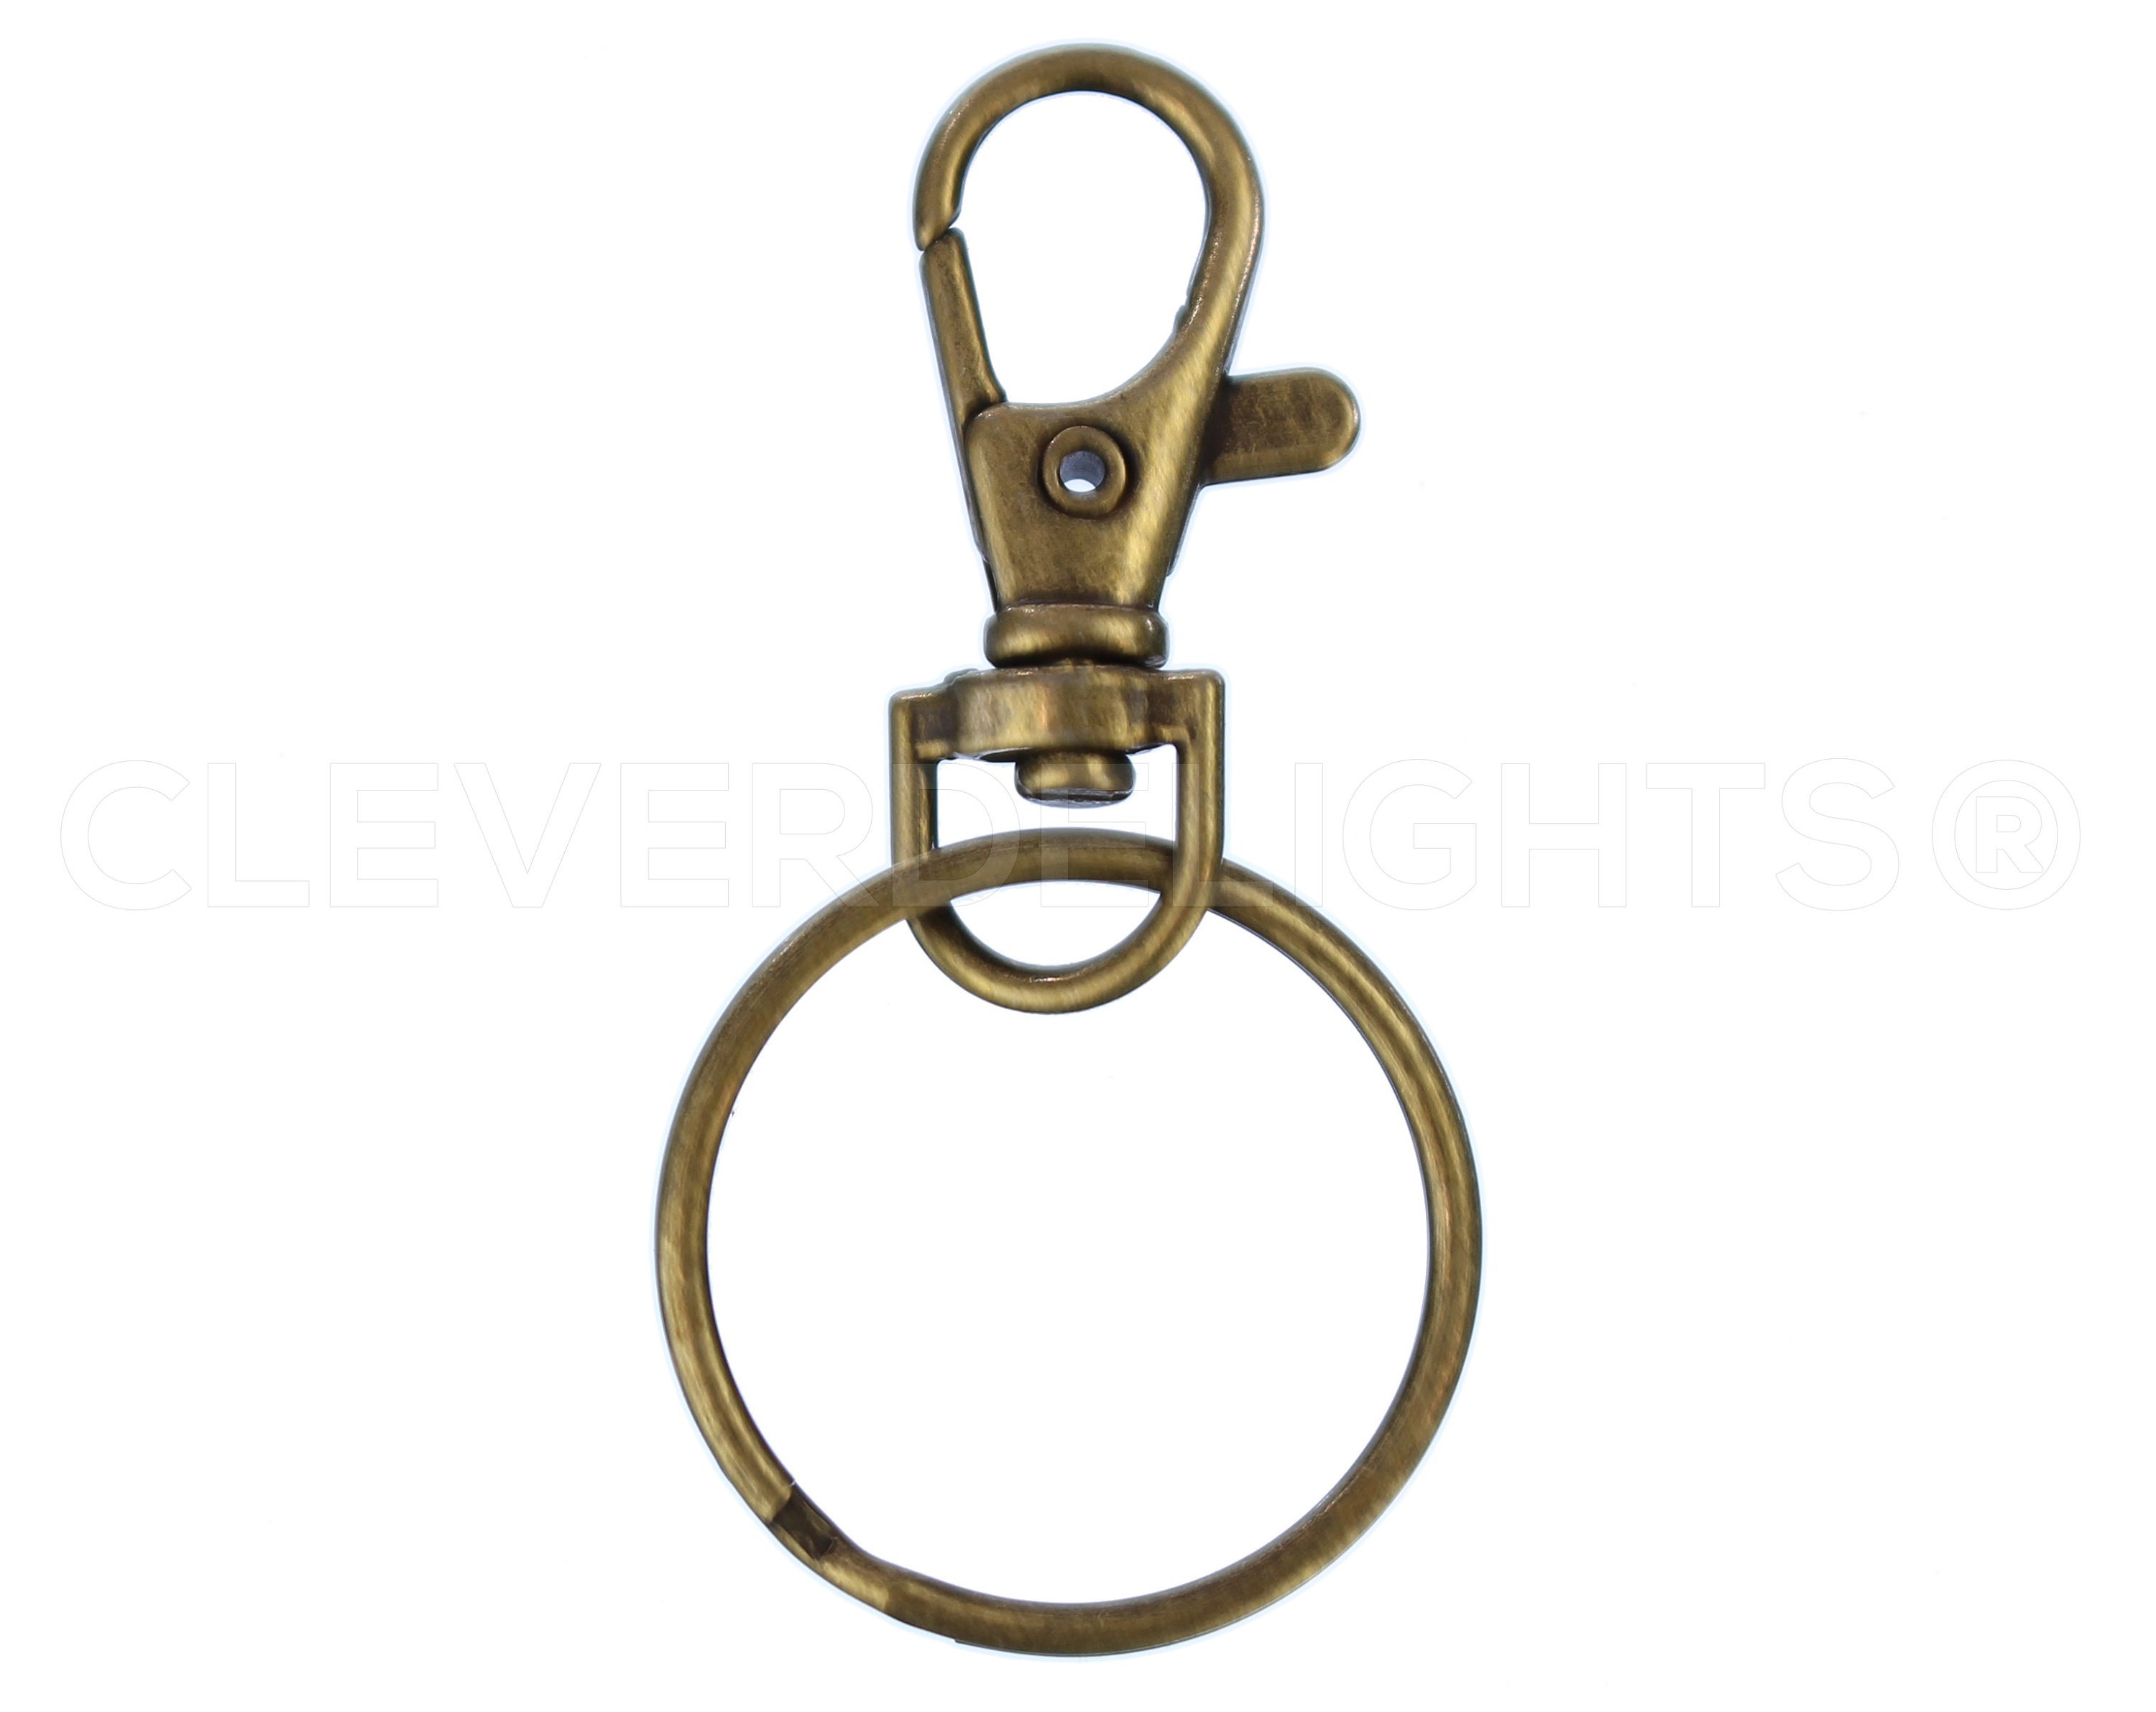 CleverDelights 2 Key Rings - 50 Pack - Large Split Key Rings - Strong Key Chain Ring Connector - 2 inch